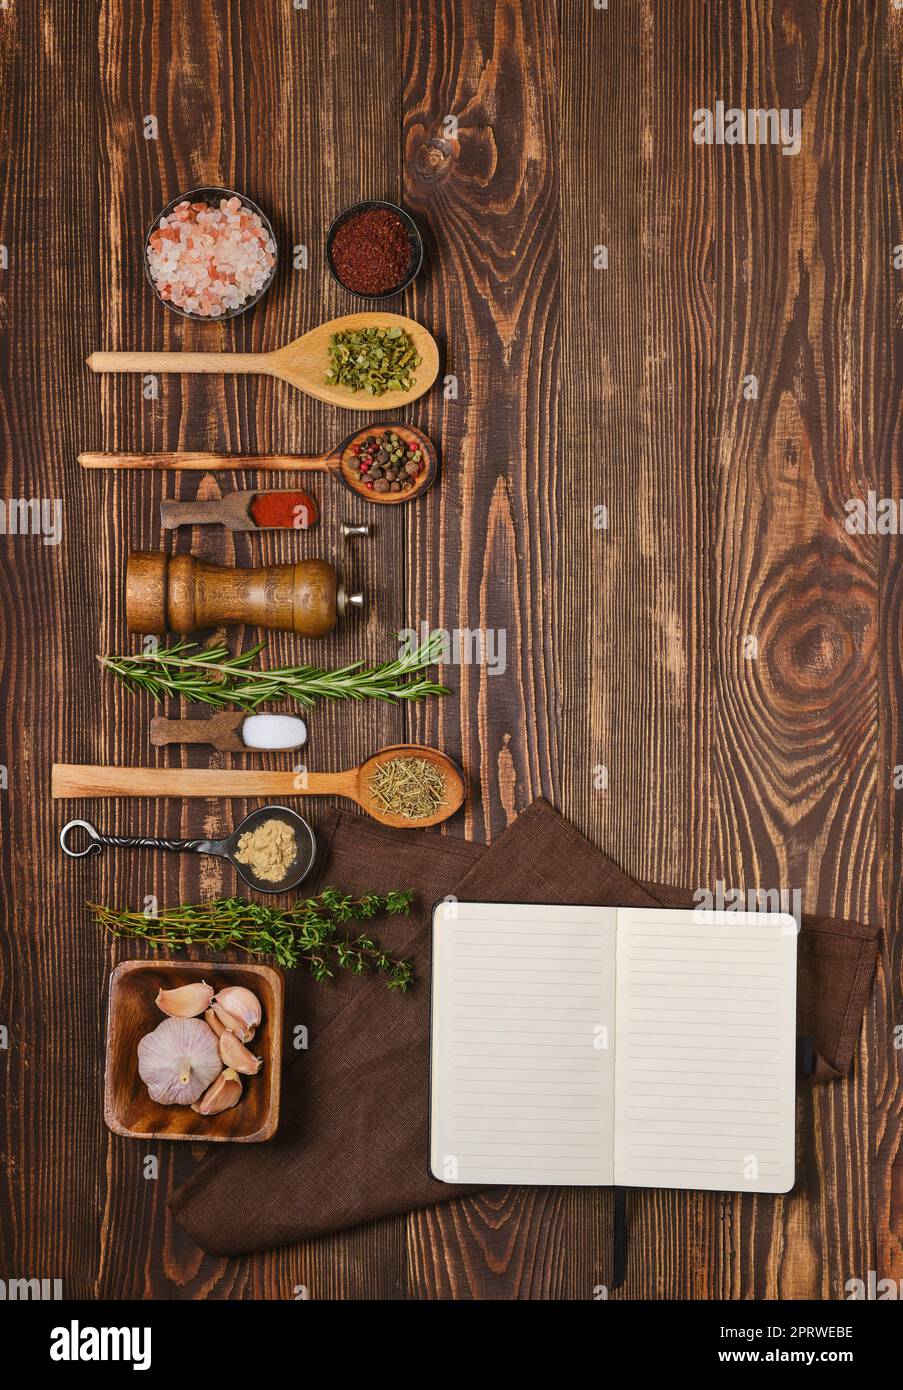 Overhead view of open cookbook for recipes laying next to kitchen spoons and bowls with spices and seasonings Stock Photo